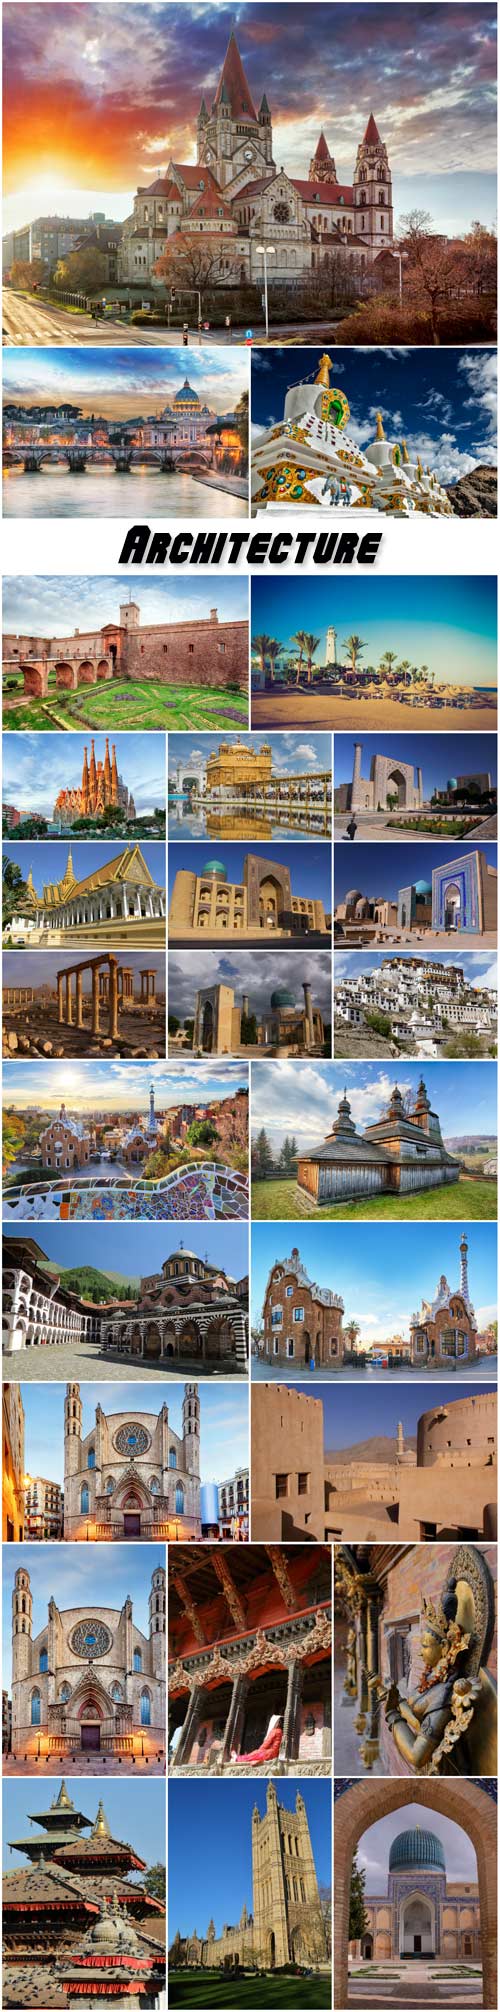 Architecture the various countries